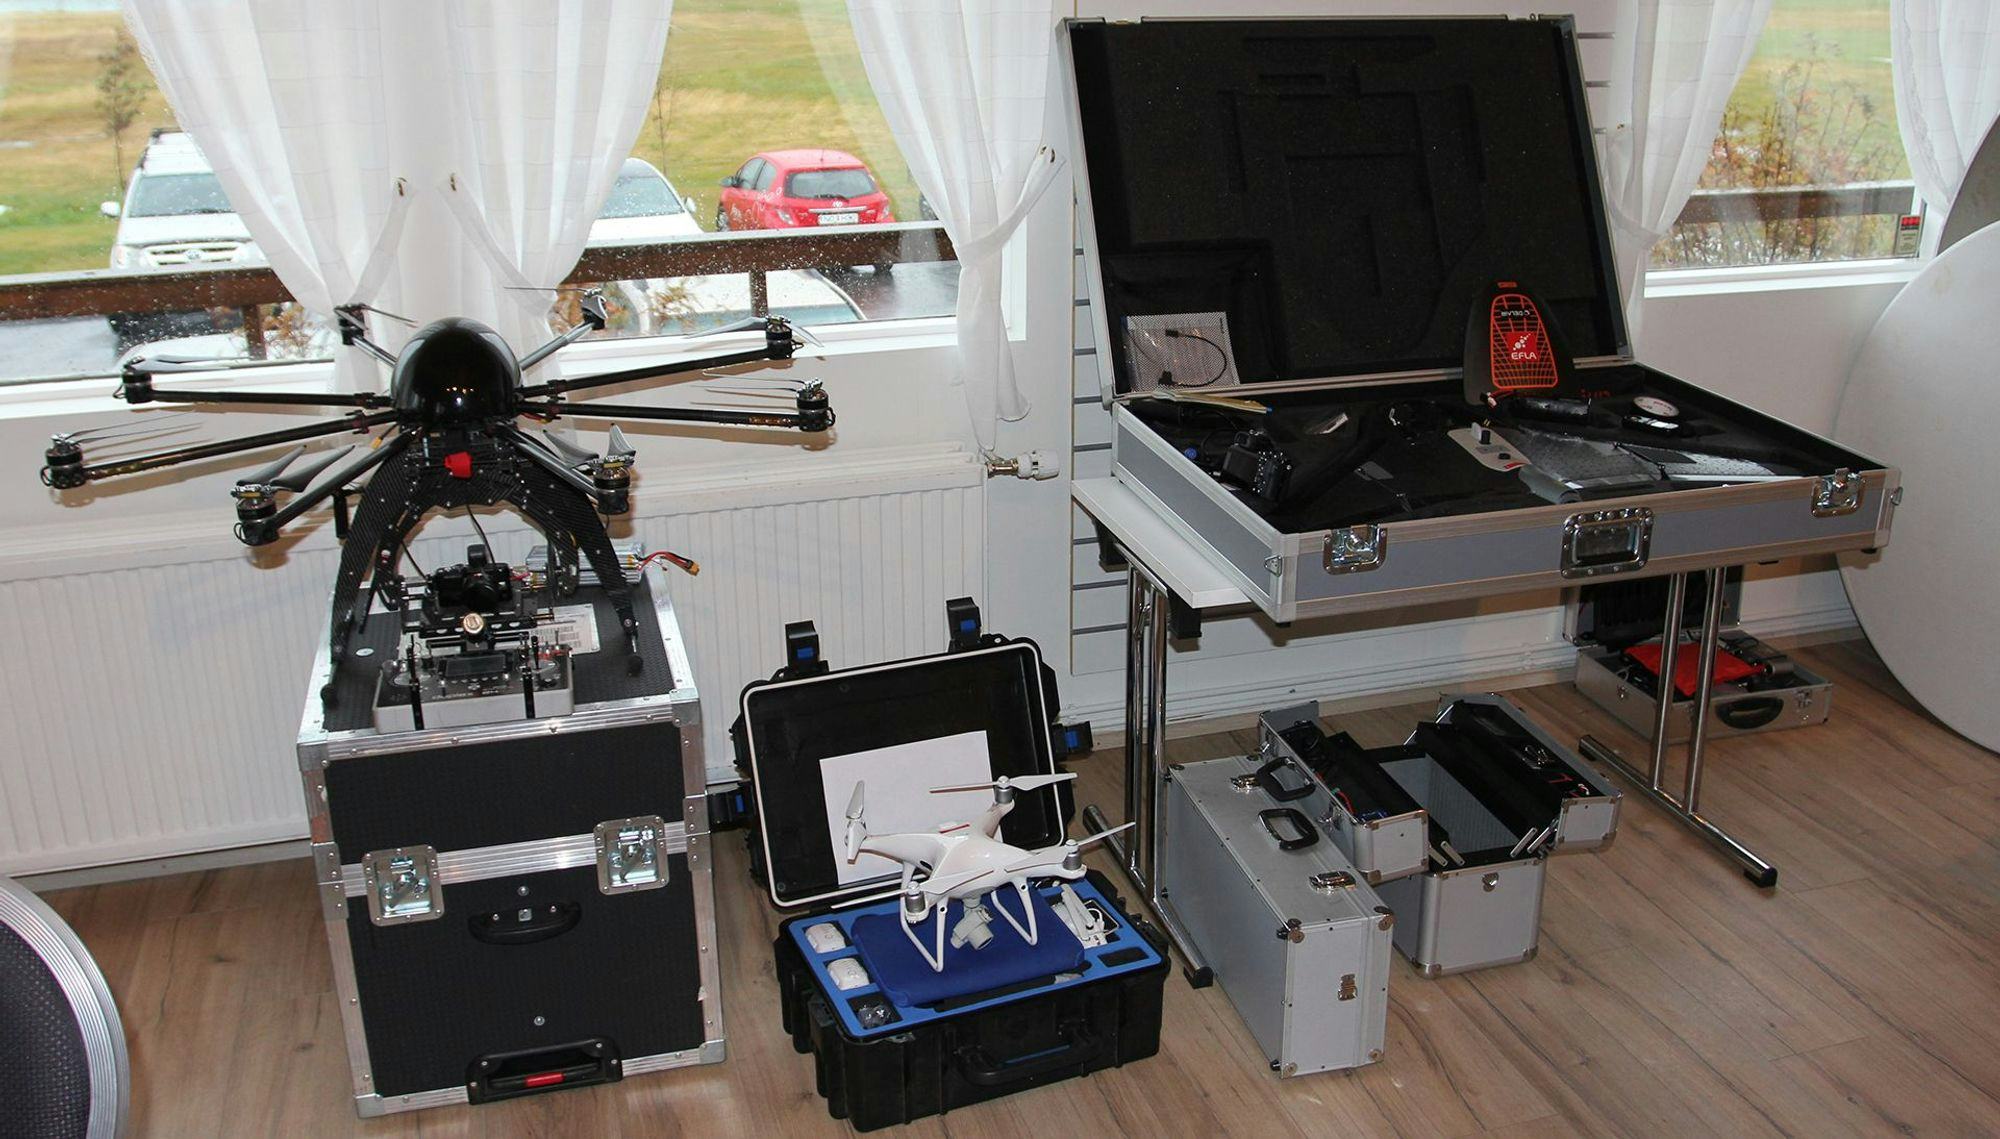 Variety of drones and their storage cases